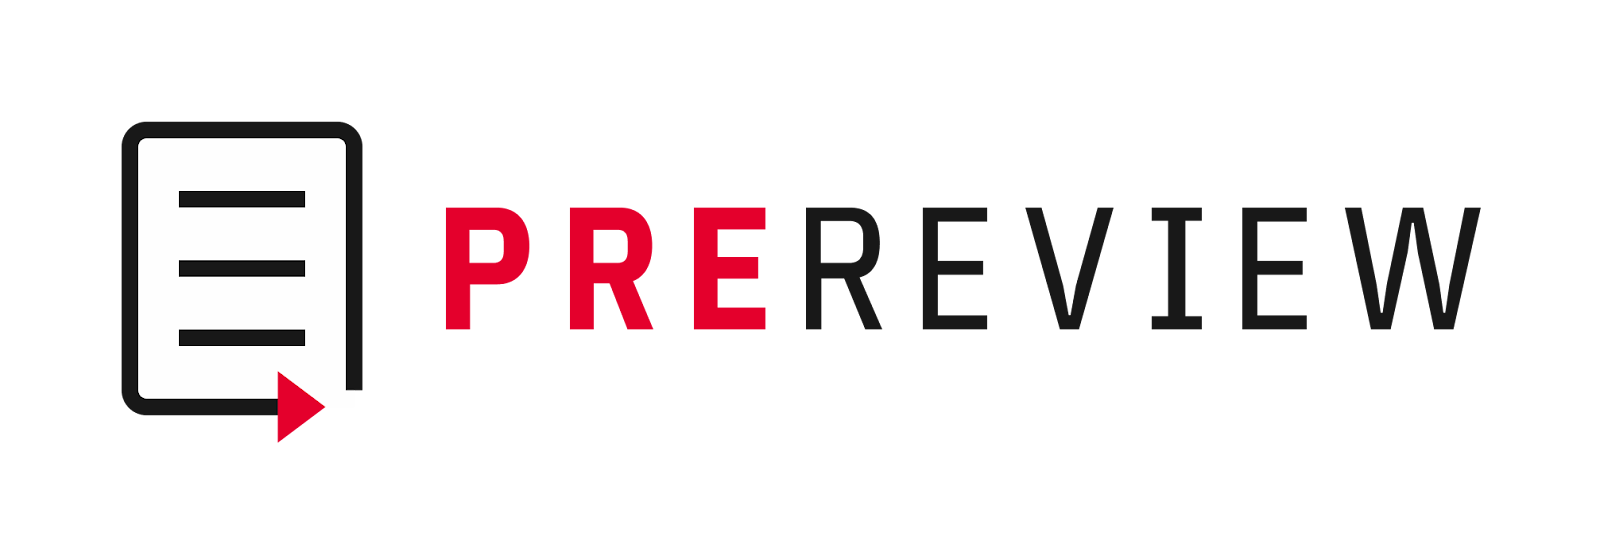 The PREreview logo showing an icon of a piece of paper with a forward-pointing arrow on its bottom edge pointing towards the PREreview wordmark